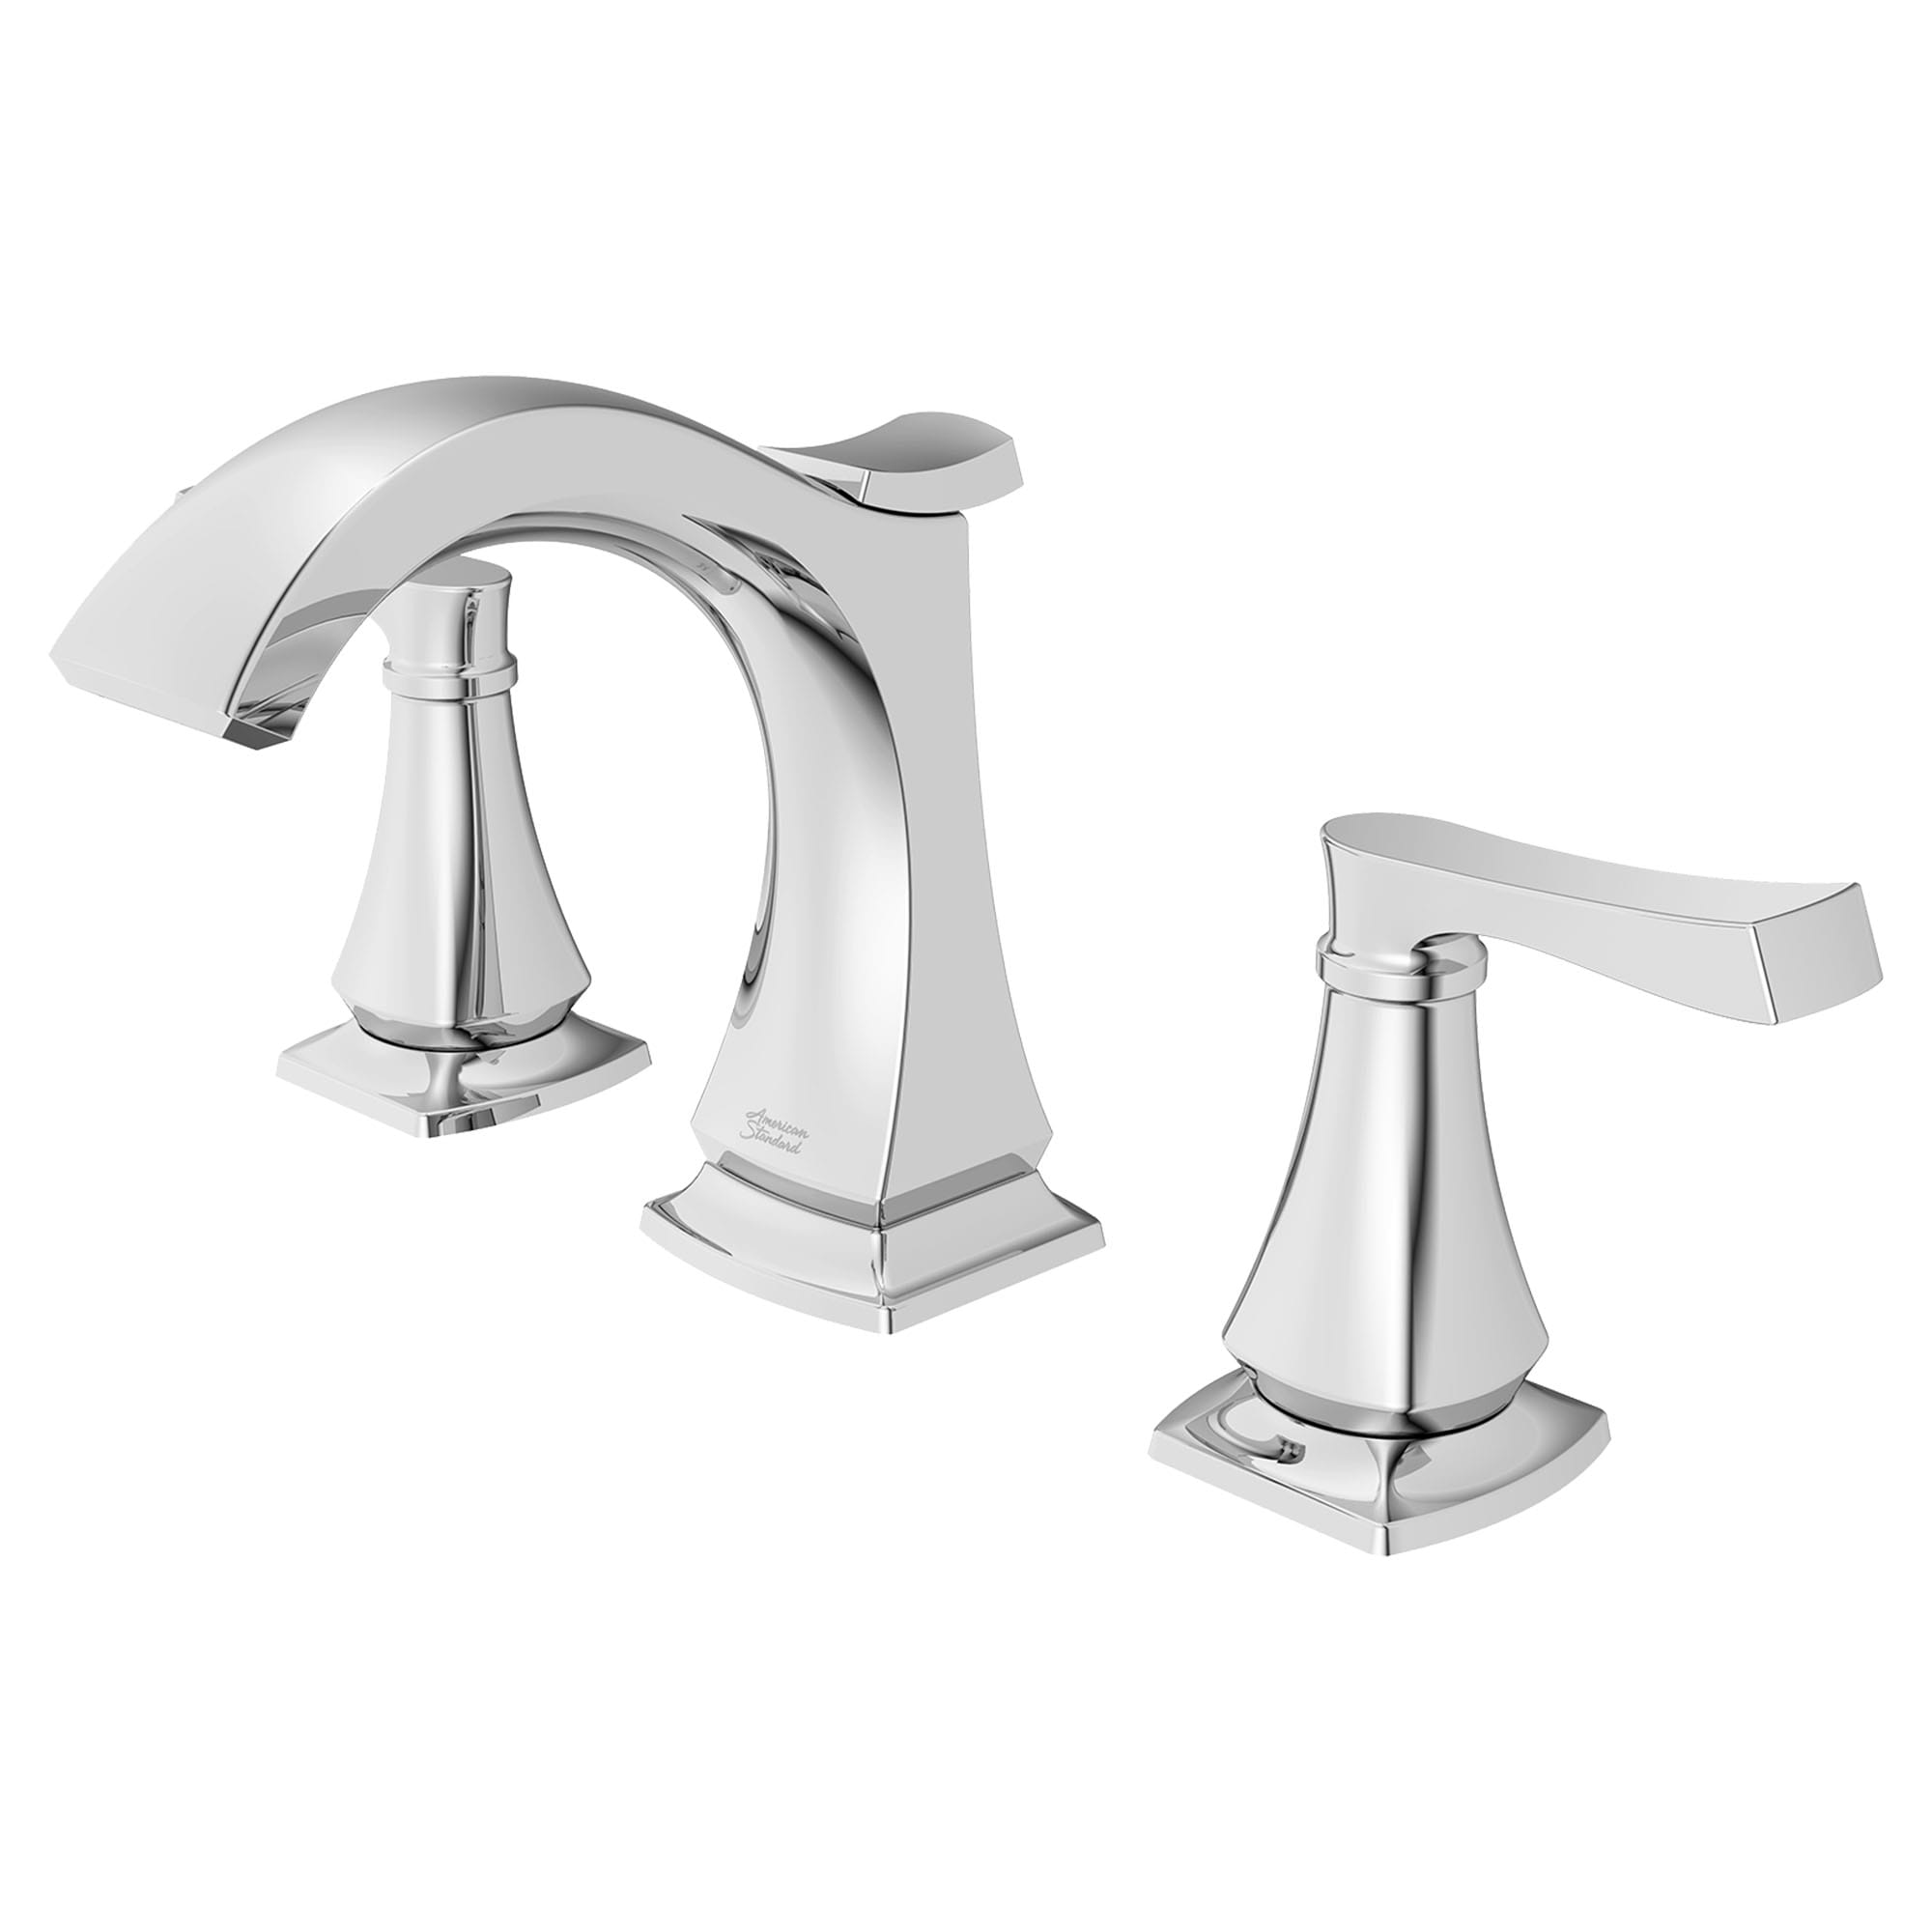 Kaleta 8 In Widespread 2 Handle Bathroom Faucet 15 GPM with Lever Handles CHROME